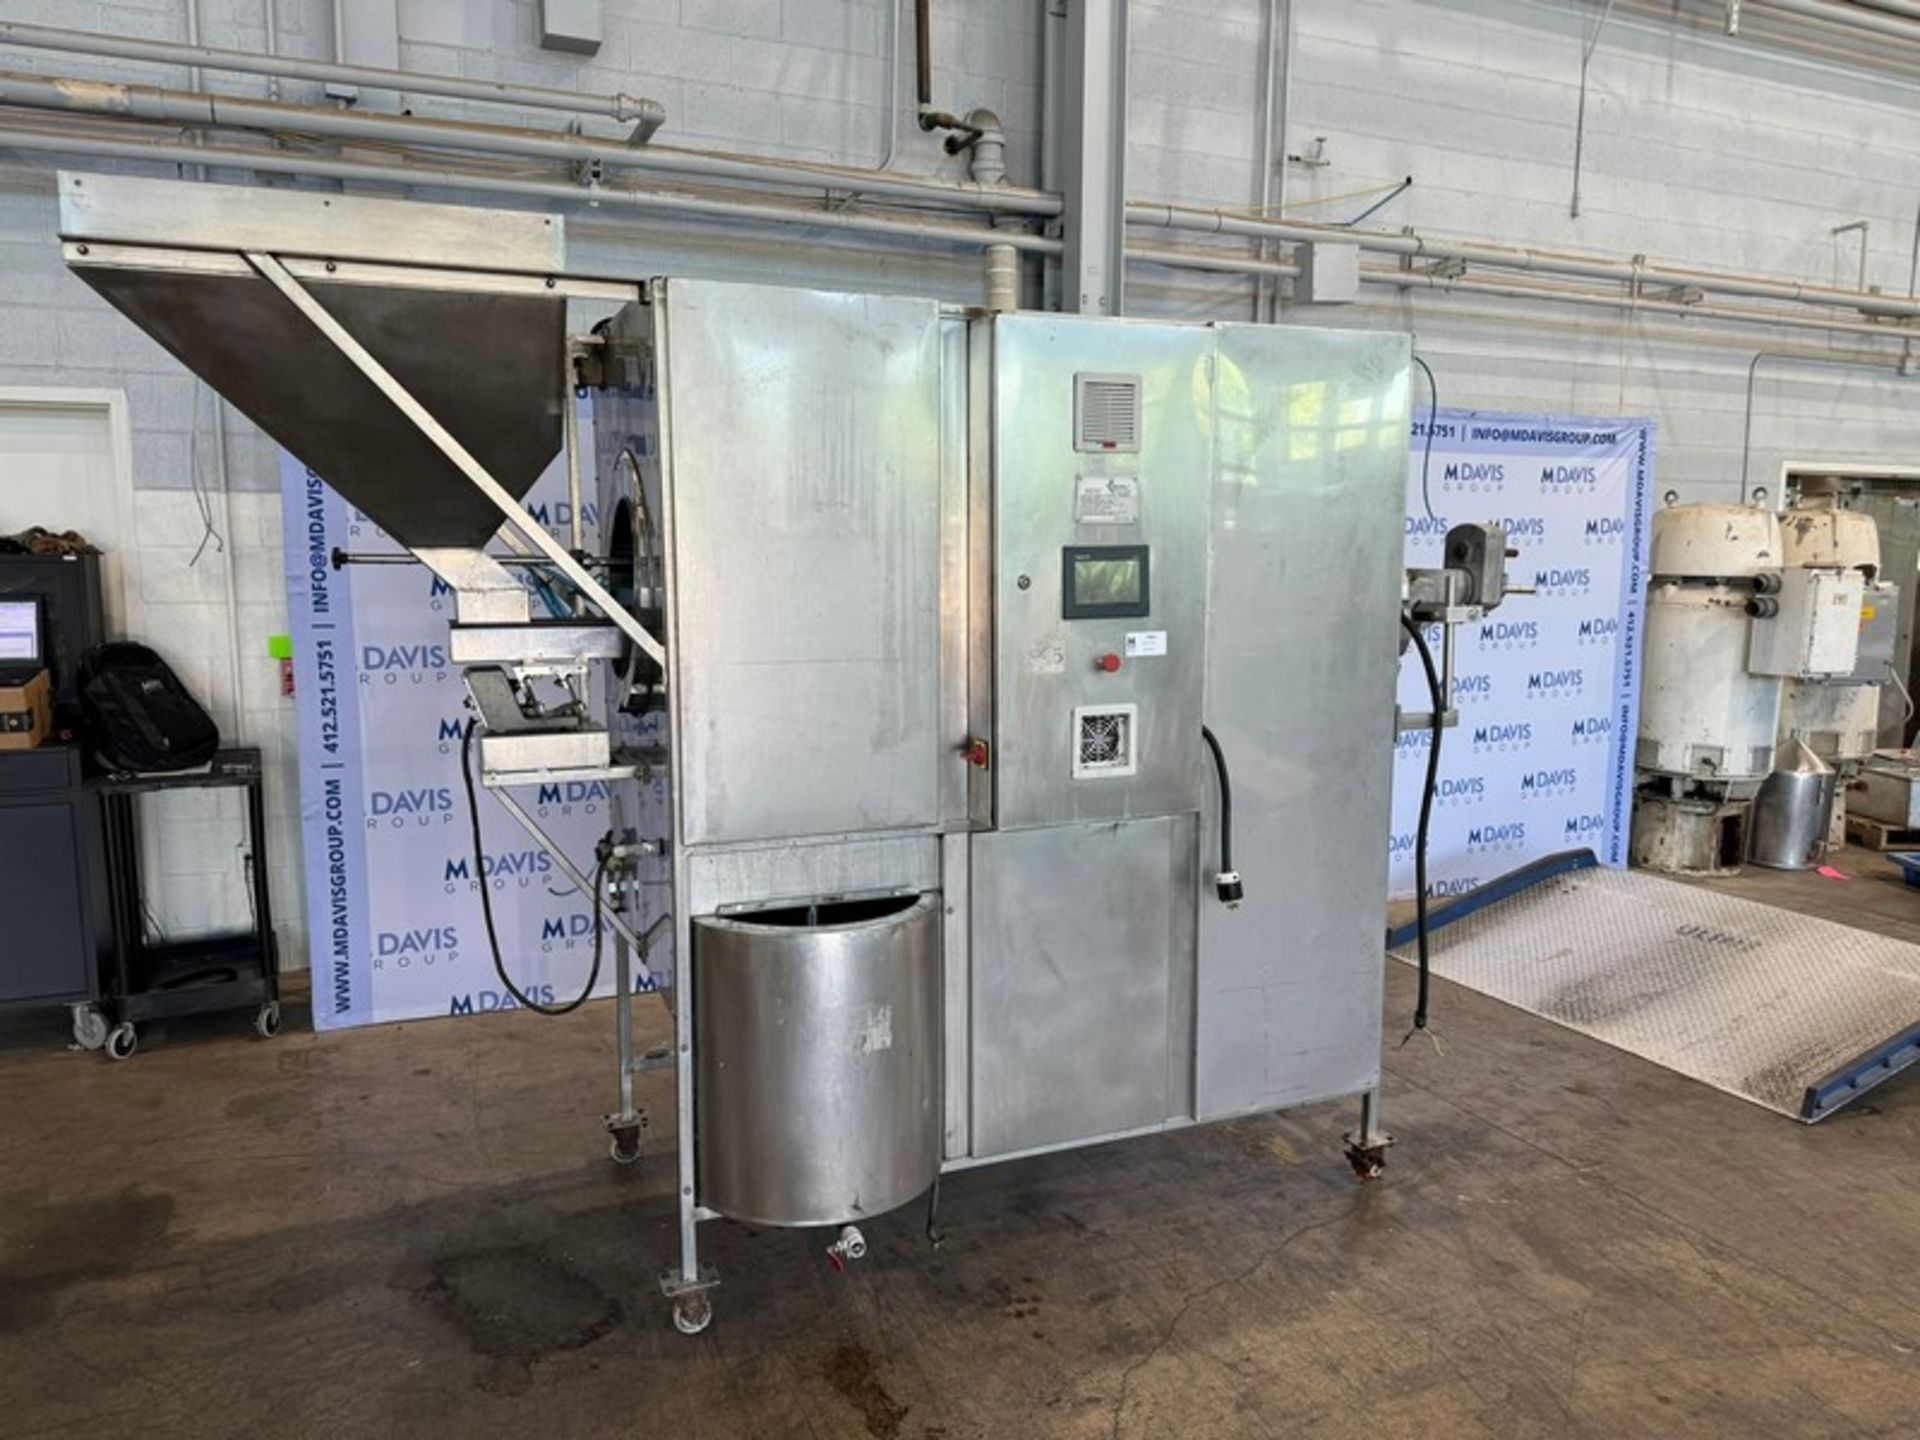 2014 SEVVAL Automatik Seasoning Tumbler, M/N 0S01, S/N 935/2, 380 Volts, with S/S Shaker Deck